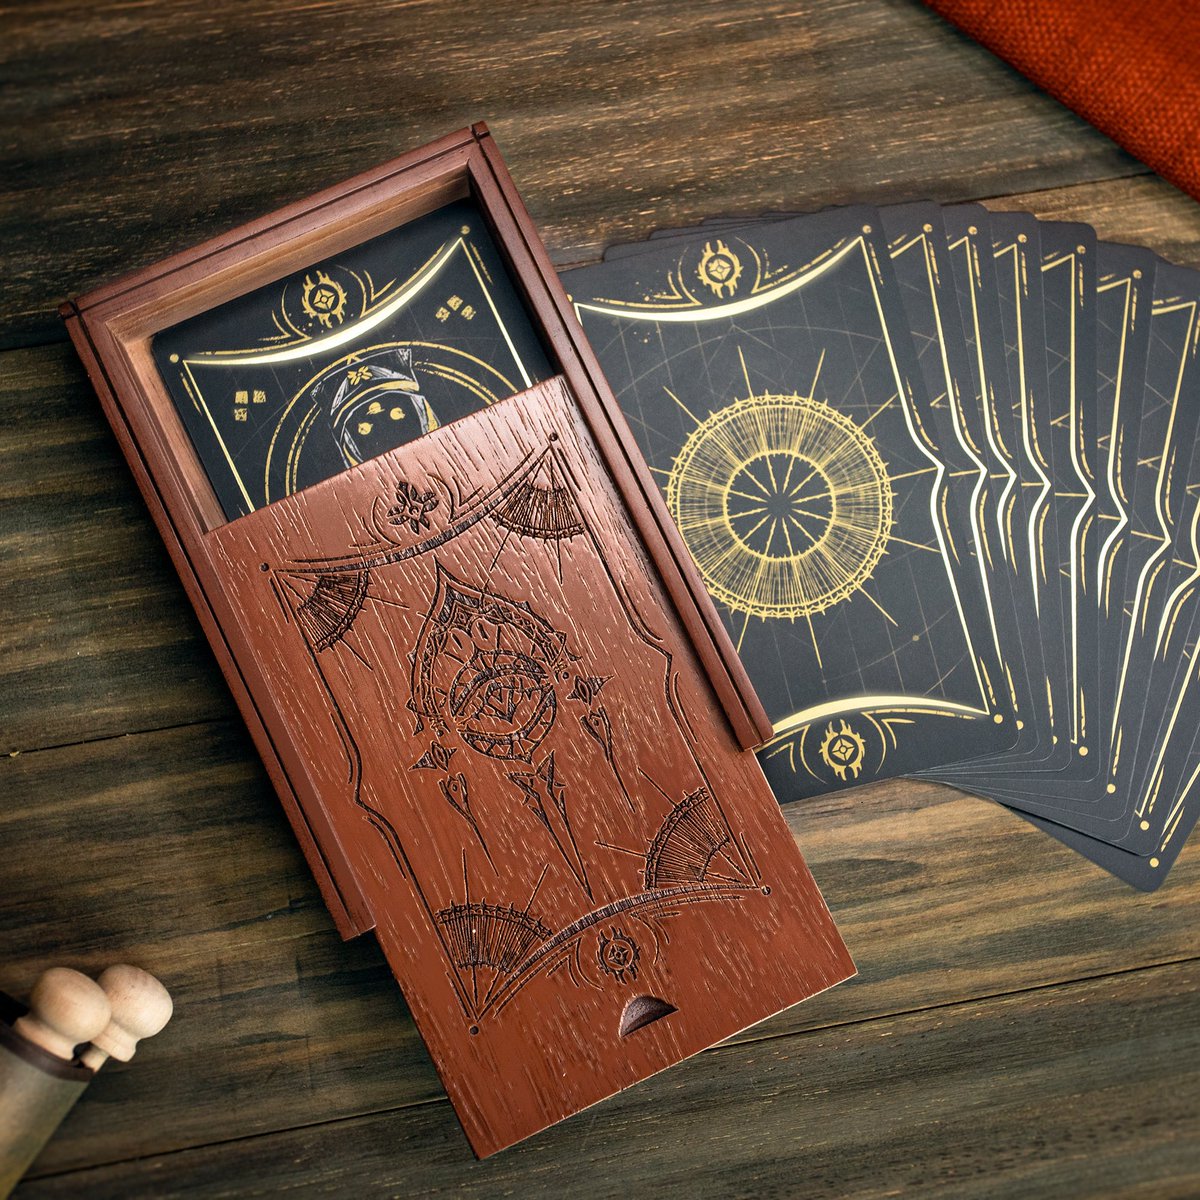 Let the Deck of Whispers unfold beneath your own hands. Available now: bung.ie/3RP44Vo @DestinyTheGame would you like a reading from the Deck of Whispers?